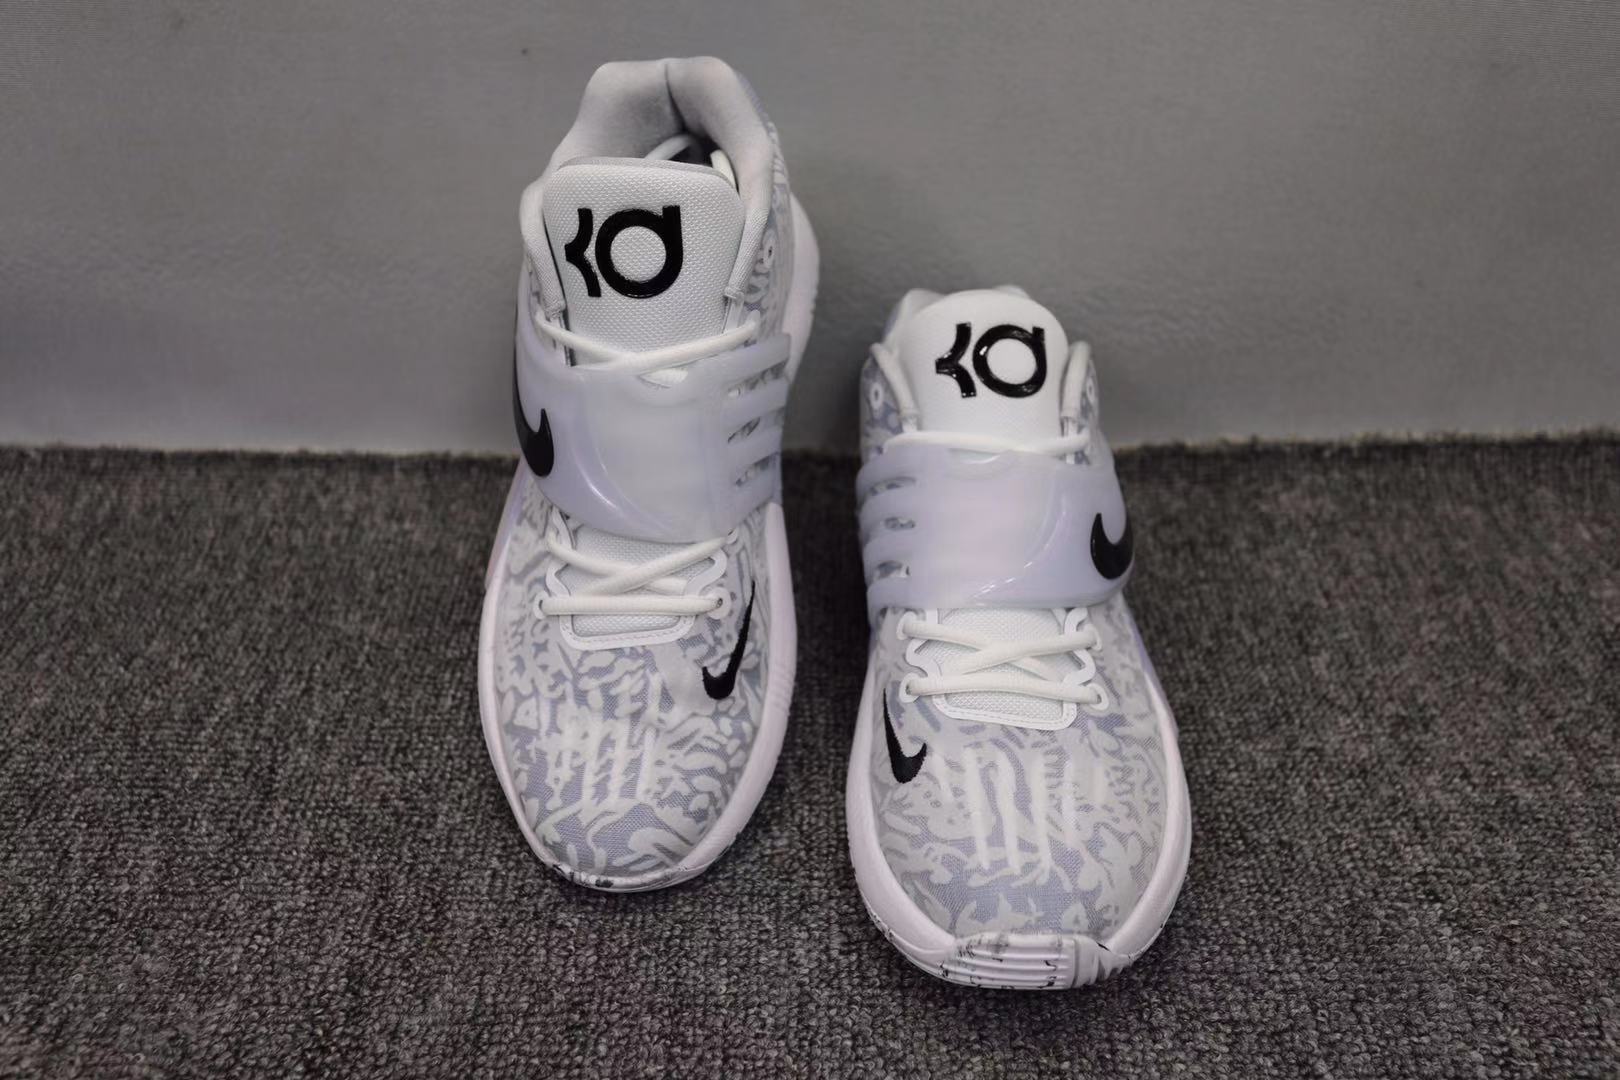 Nike KD 14 “Home” White/Black For Sale – The Sole Line